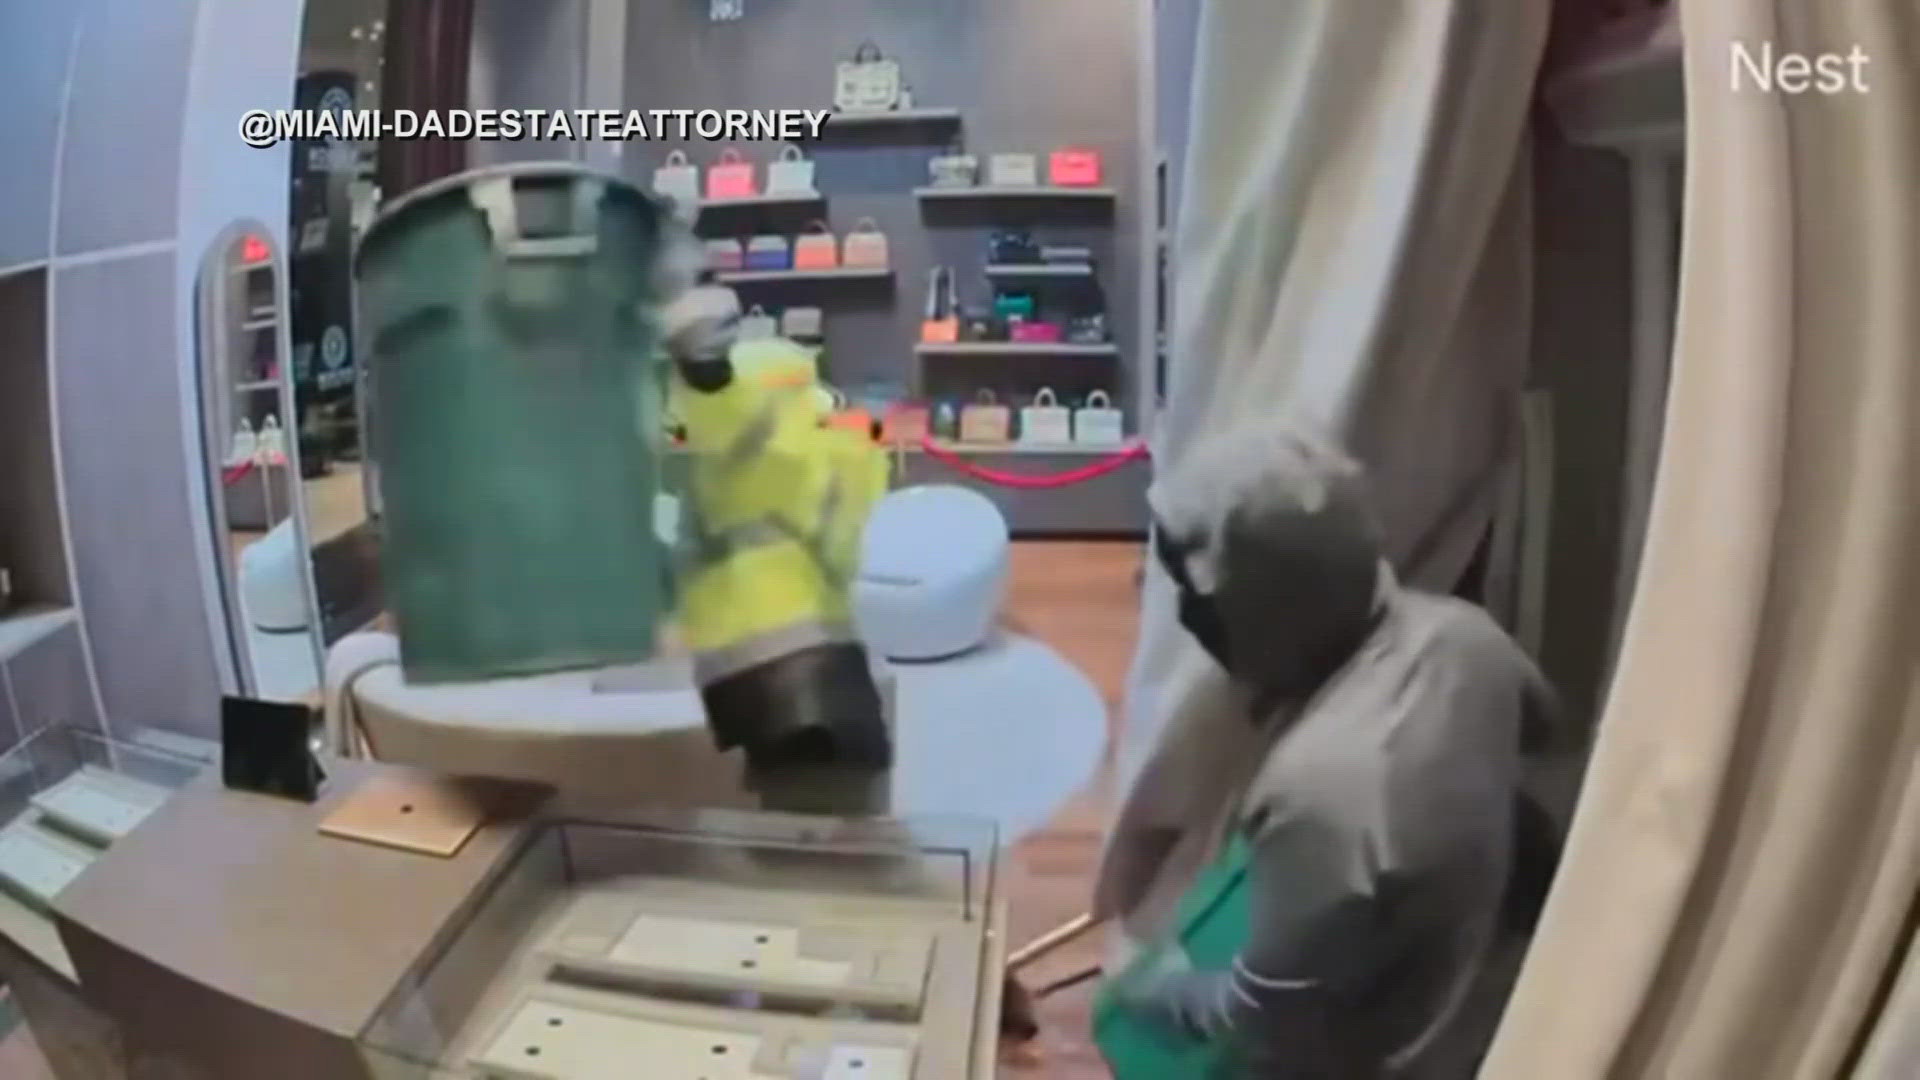 Newly released surveillance video shows thieves break into a luxury store at a Miami hotel.